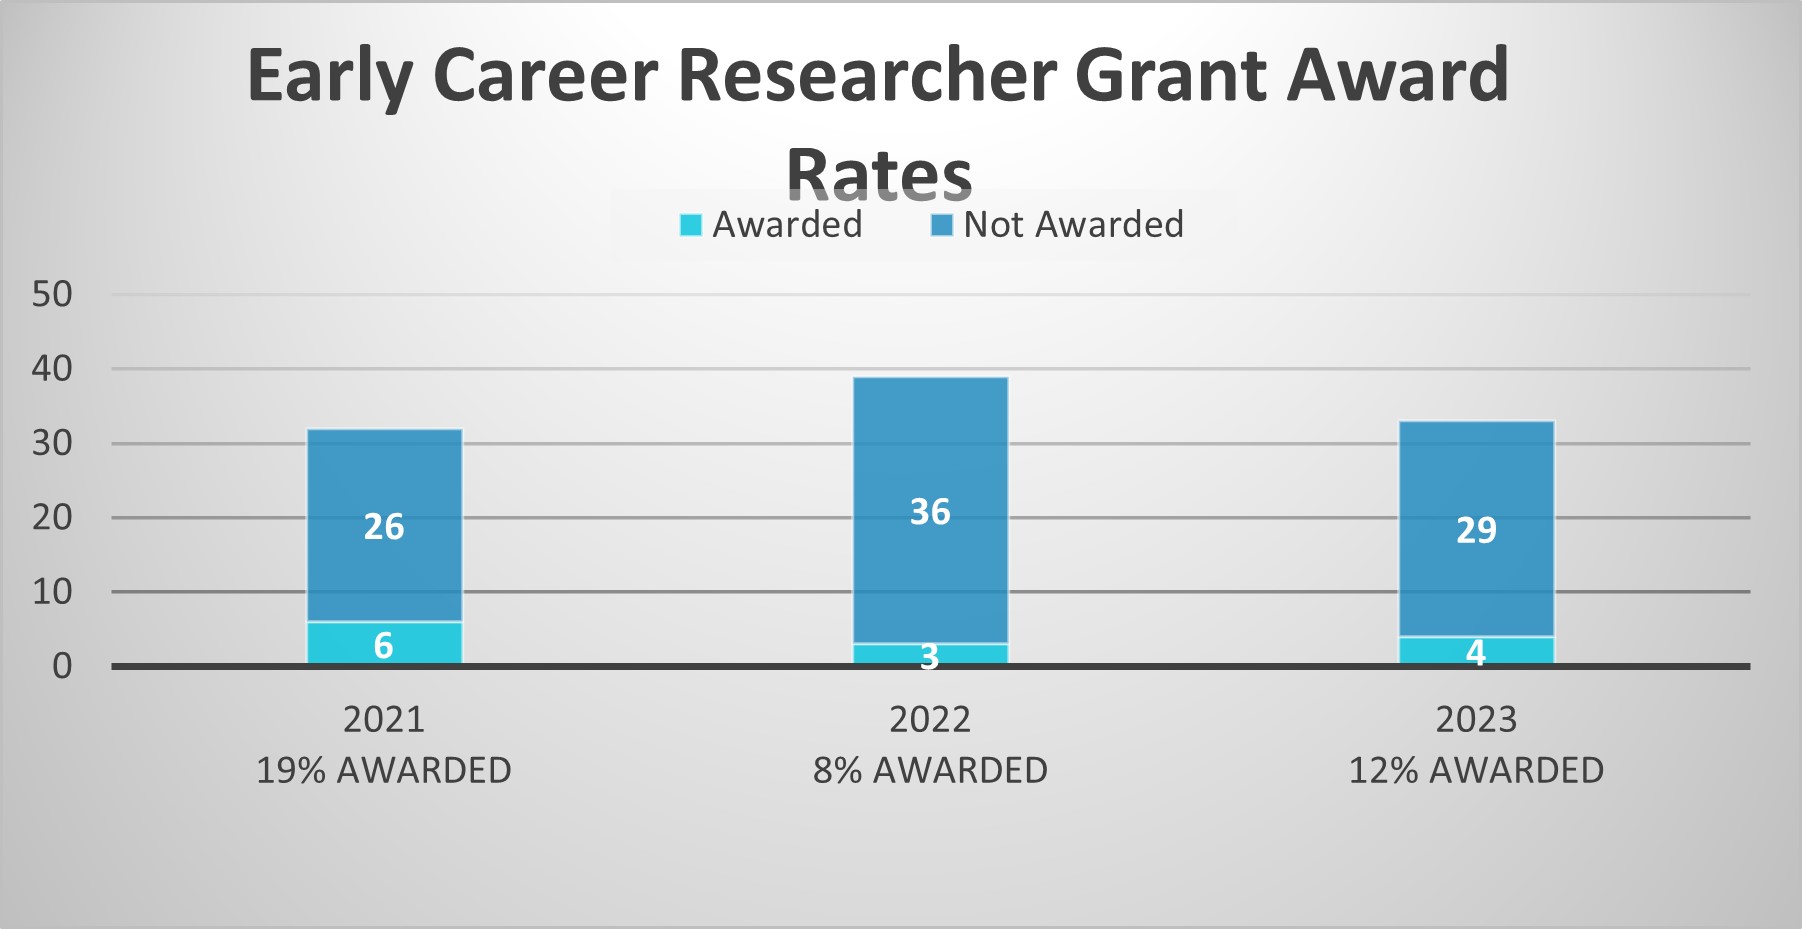 Charts showing how the application and award rates varied from 2021 to 2023 for Early Career Researcher Grants